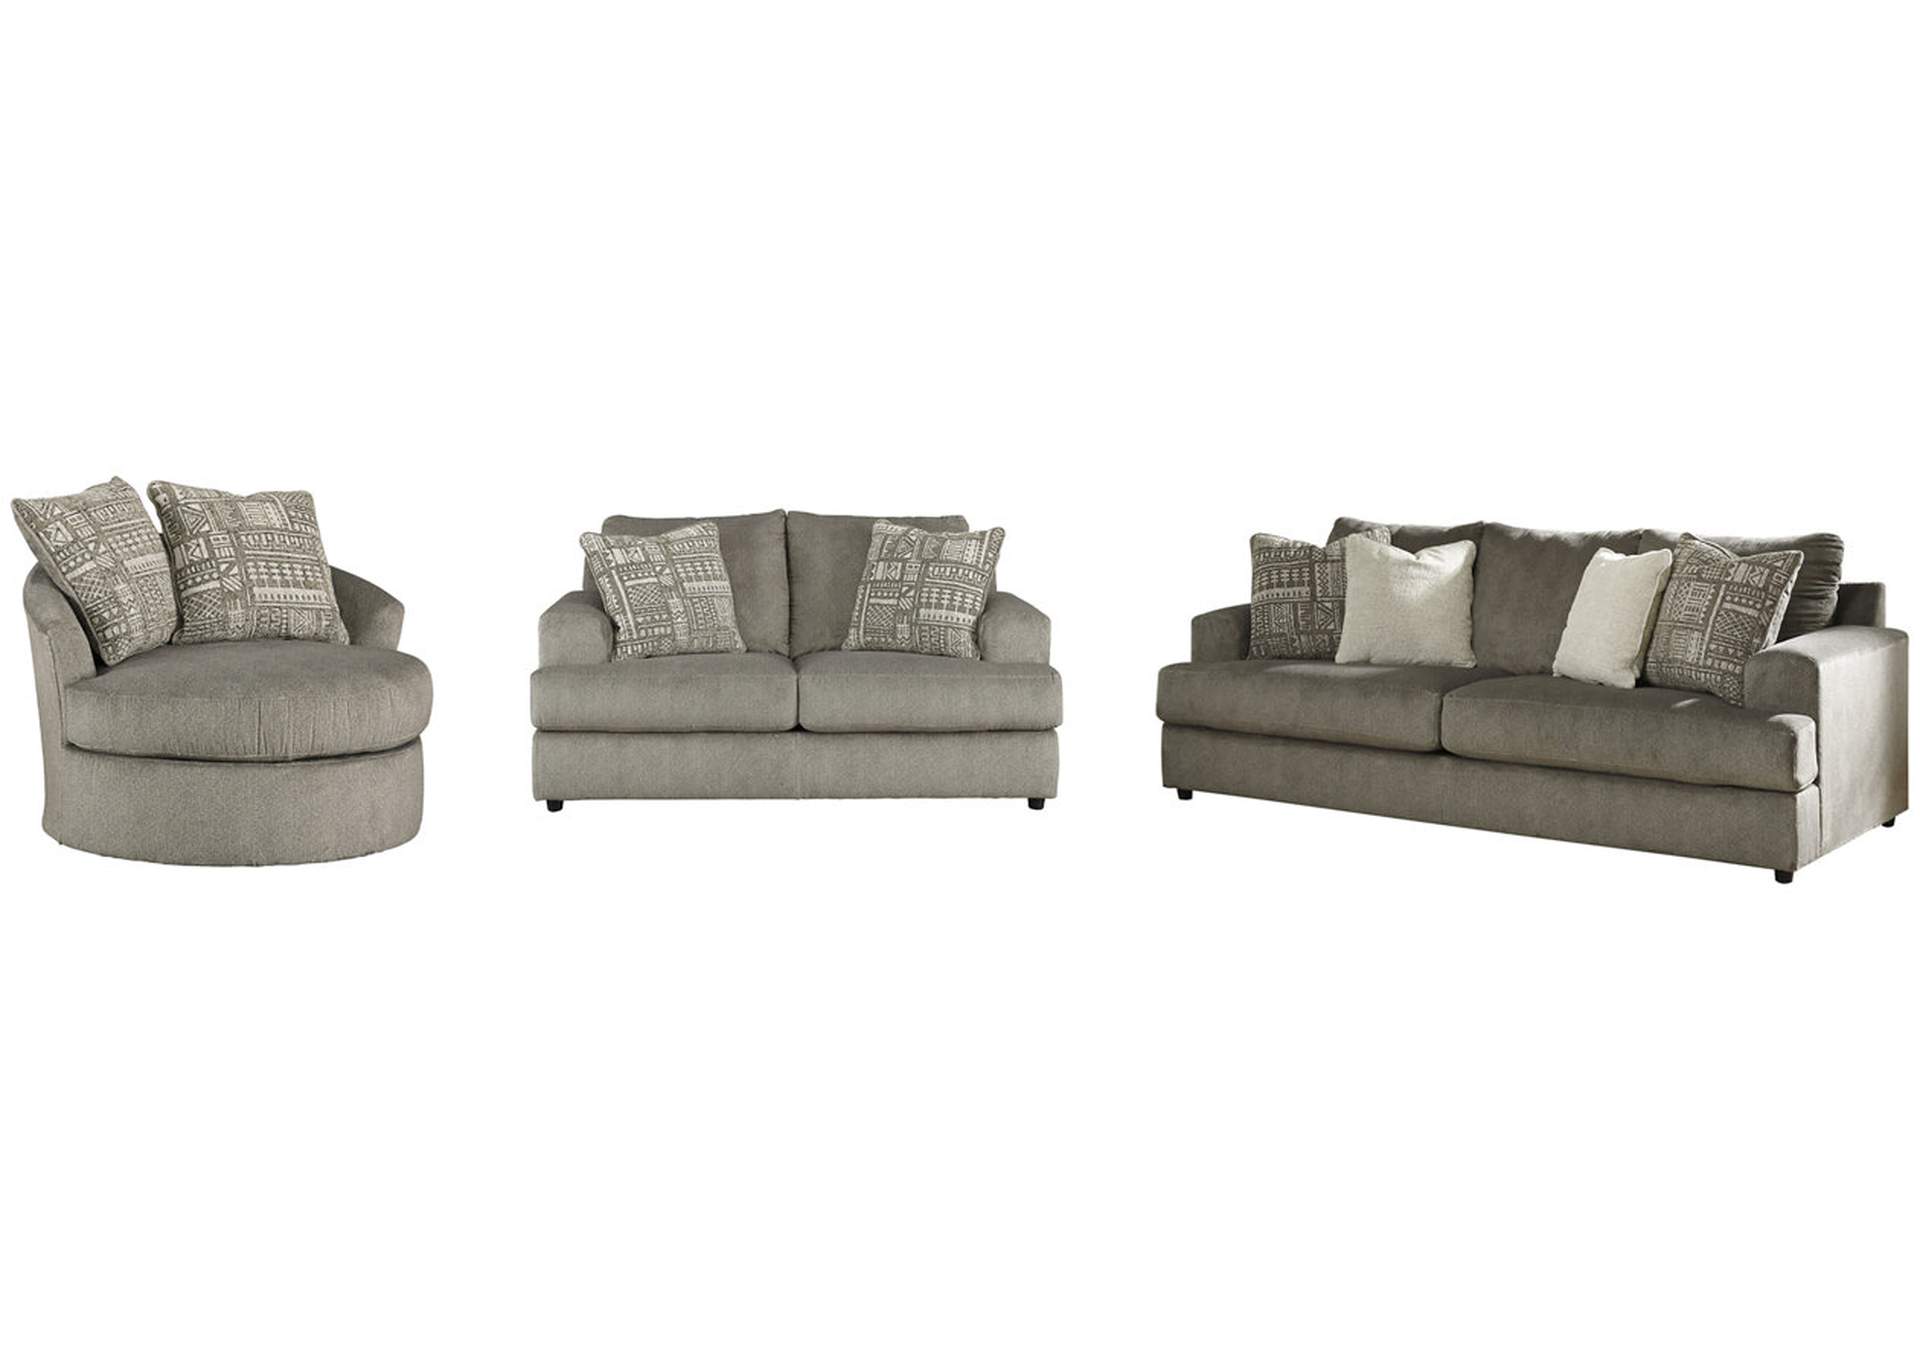 Soletren Sofa, Loveseat and Chair,Signature Design By Ashley